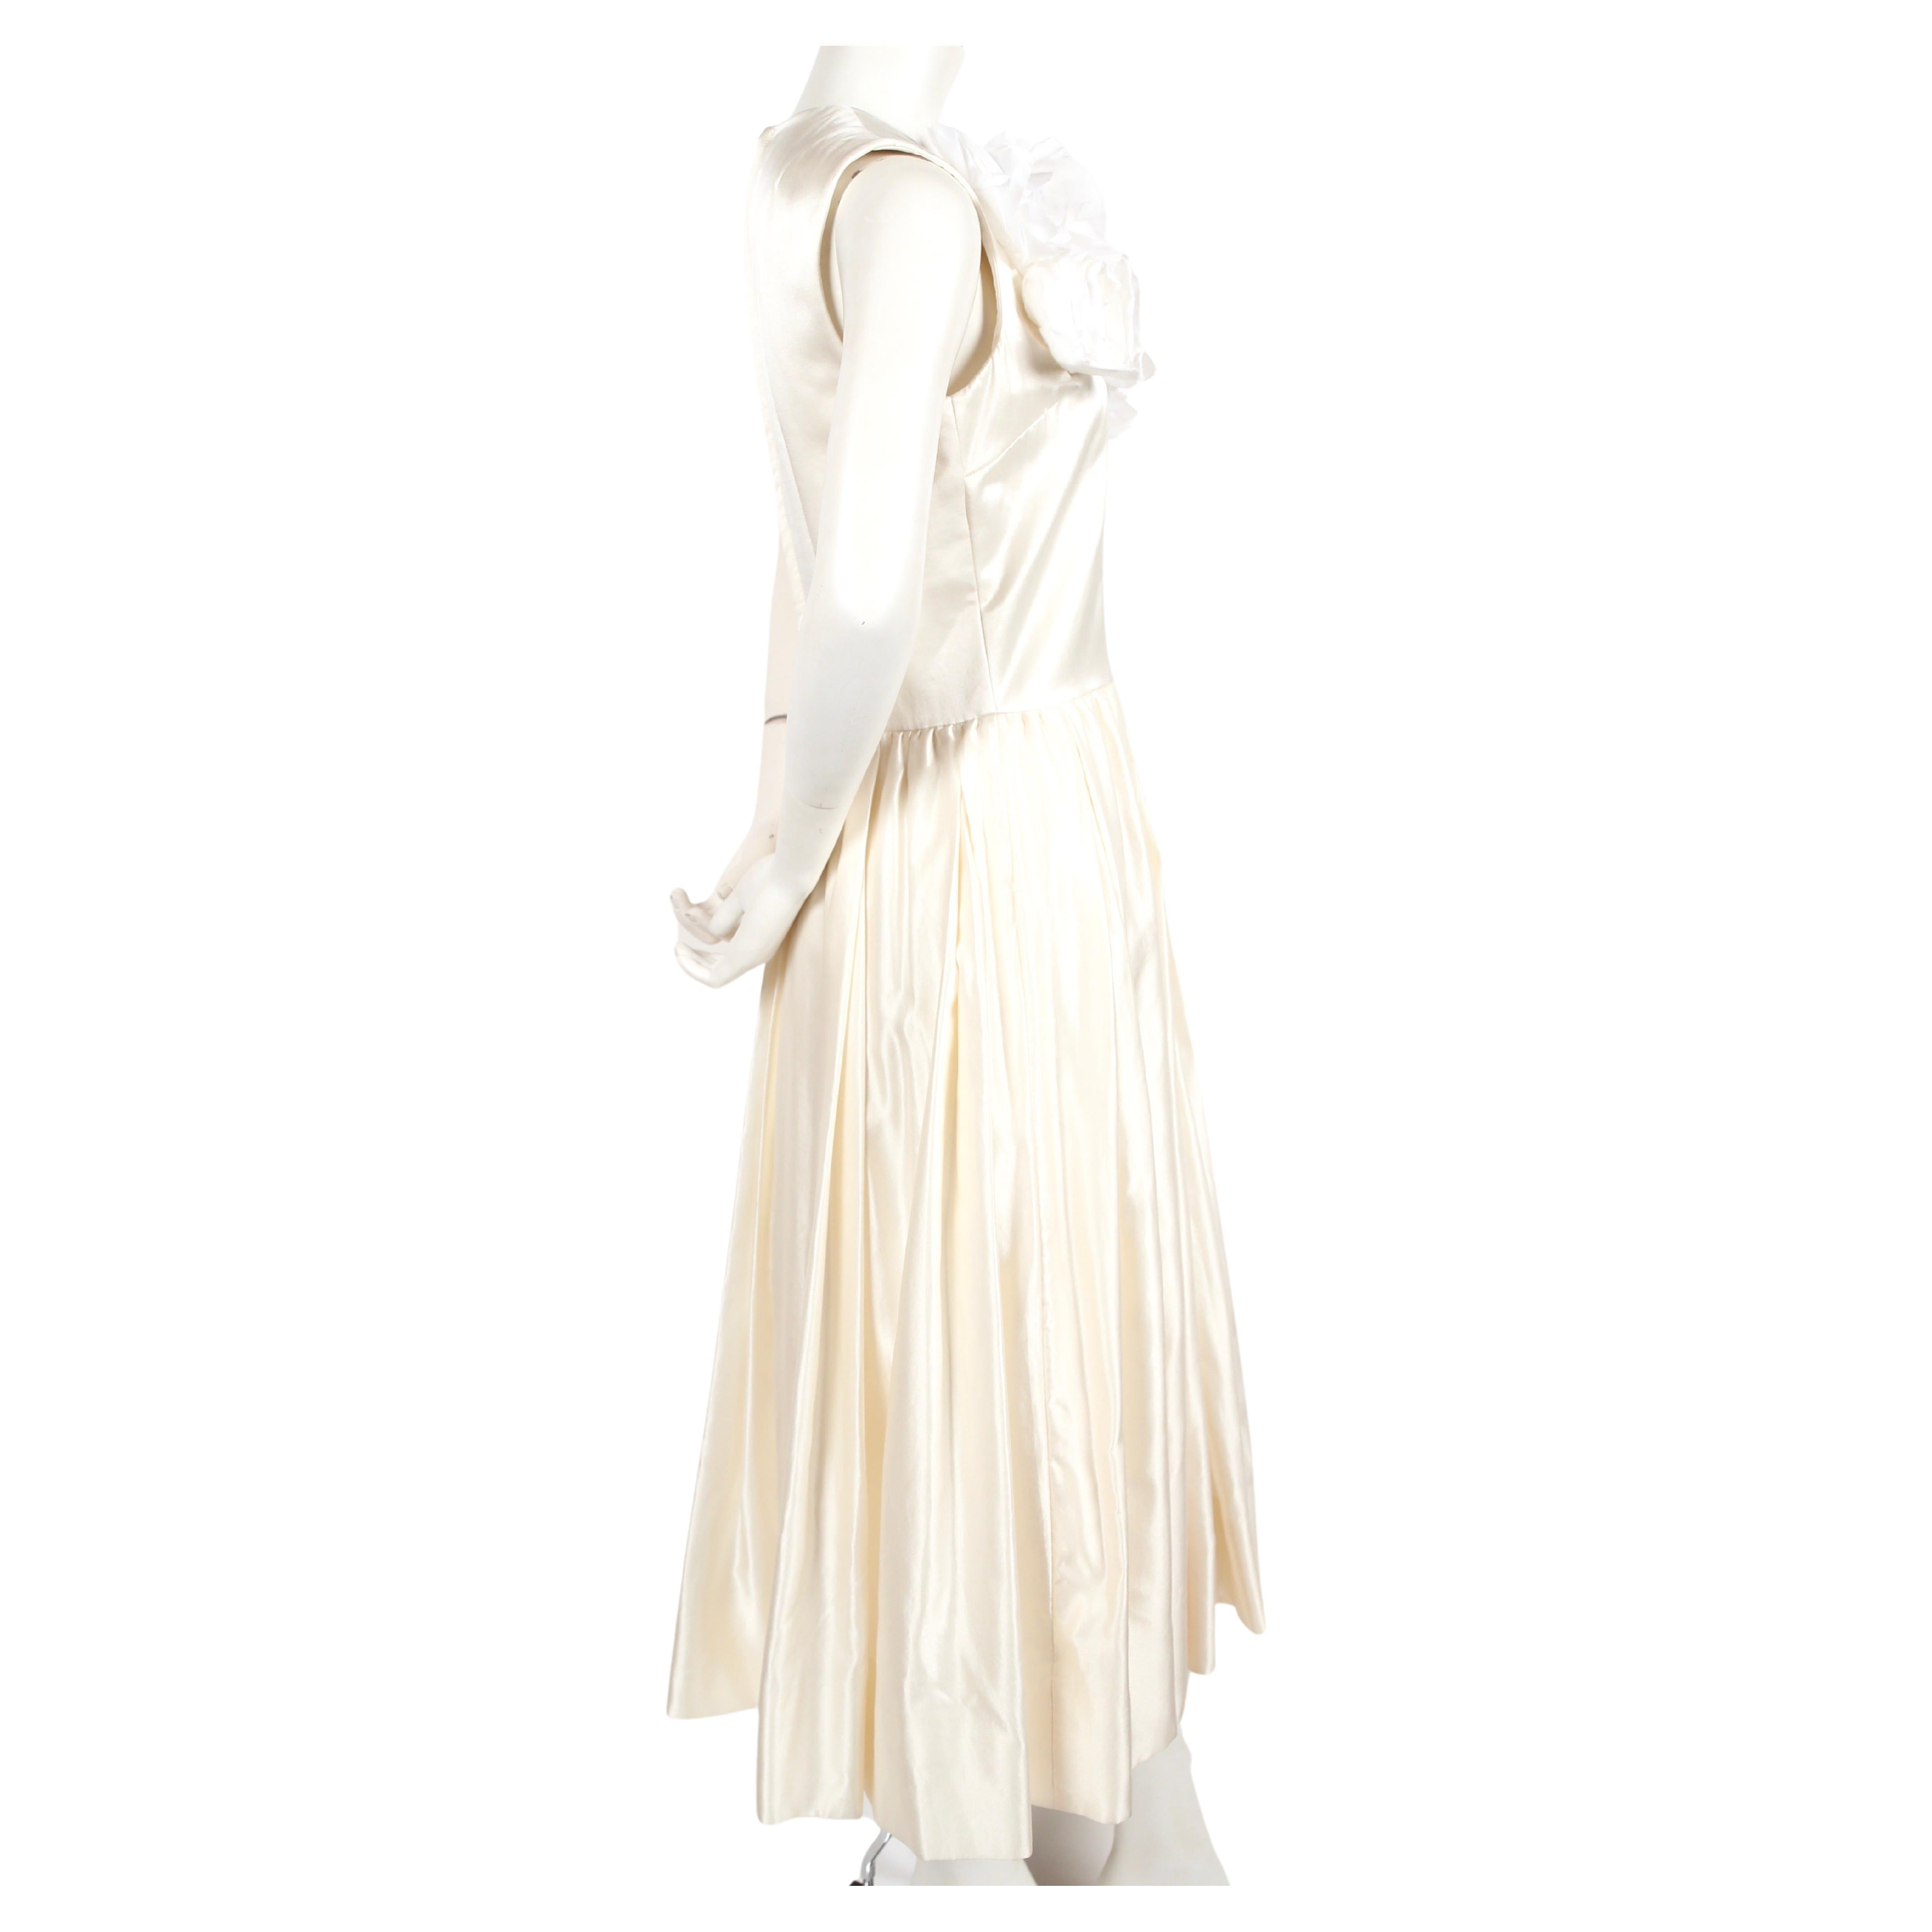 Cream silk, dress with floral detail designed by Rei Kawakubo for Comme Des Garcons dating to the 2012 Spring/Summer collection. Size 'M'. Would be spectacular as a wedding dress. Approximate measurements: shoulder 14